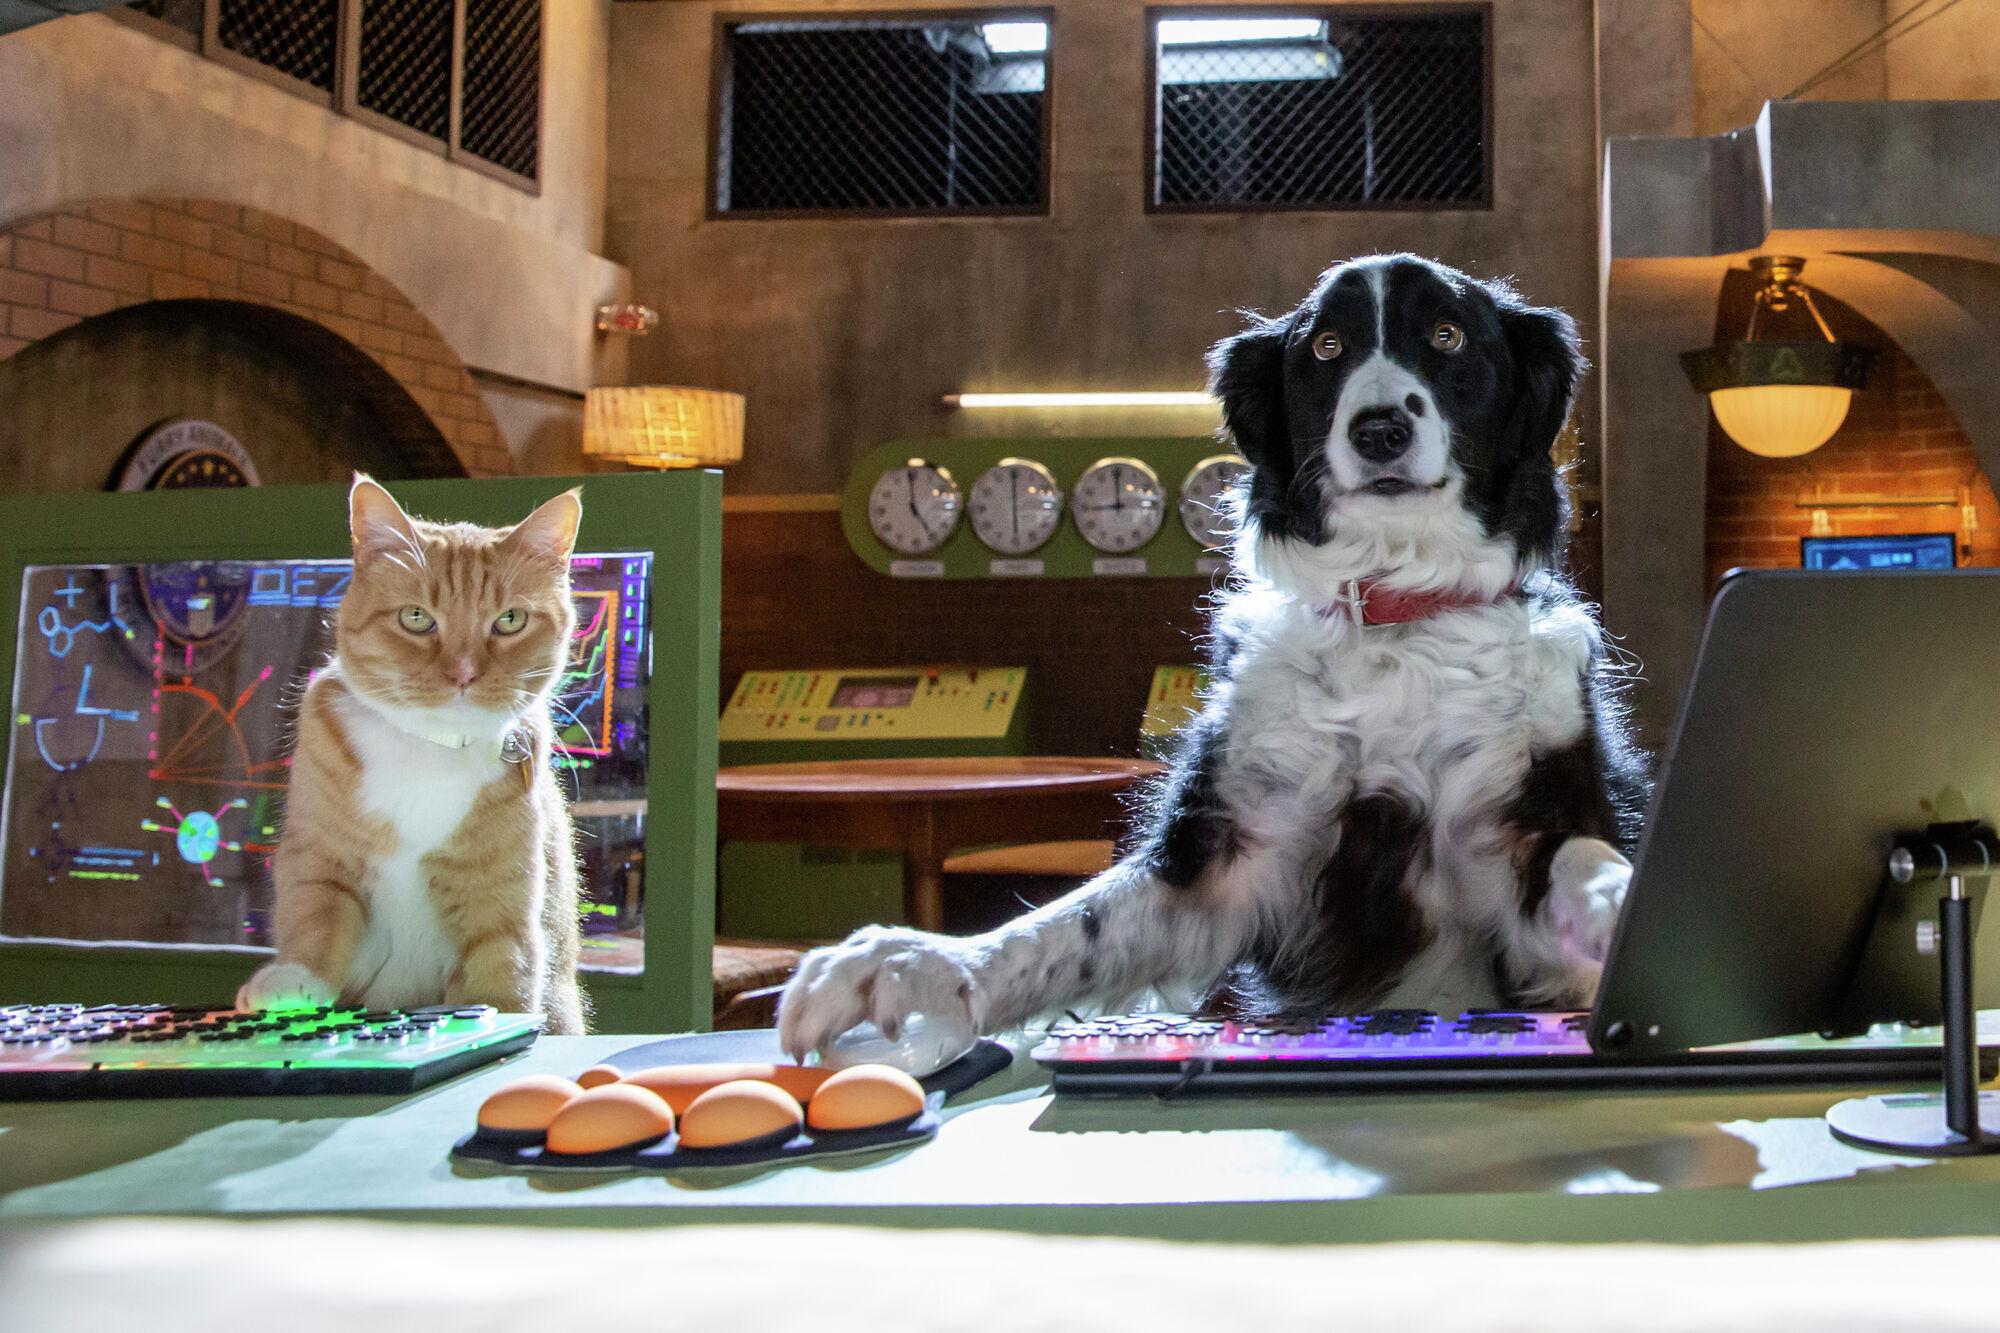 Is Cats and Dogs 3 Paws Unite on Netflix, Hulu or Amazon Prime? Where